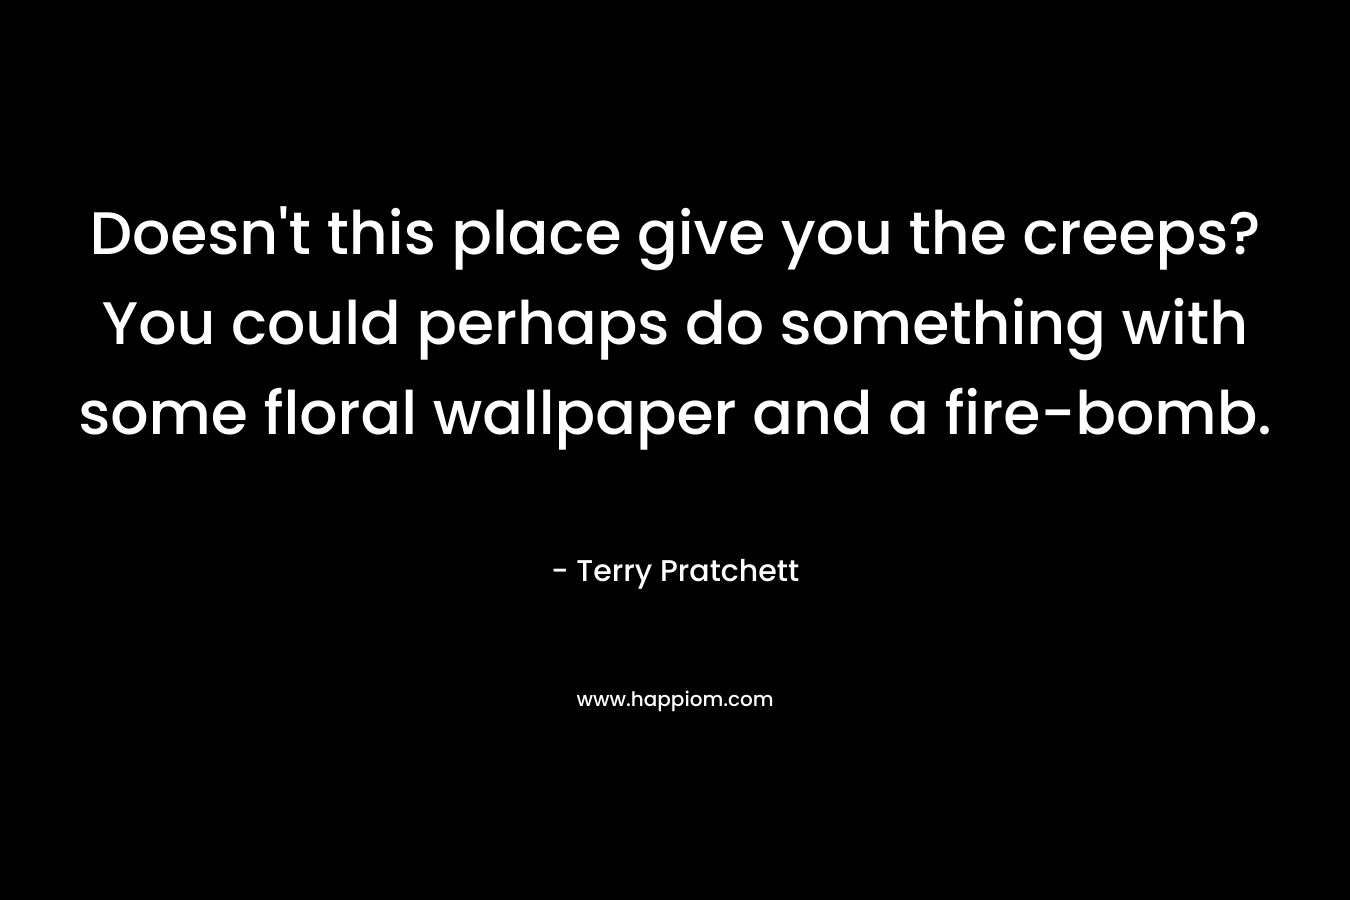 Doesn’t this place give you the creeps? You could perhaps do something with some floral wallpaper and a fire-bomb. – Terry Pratchett